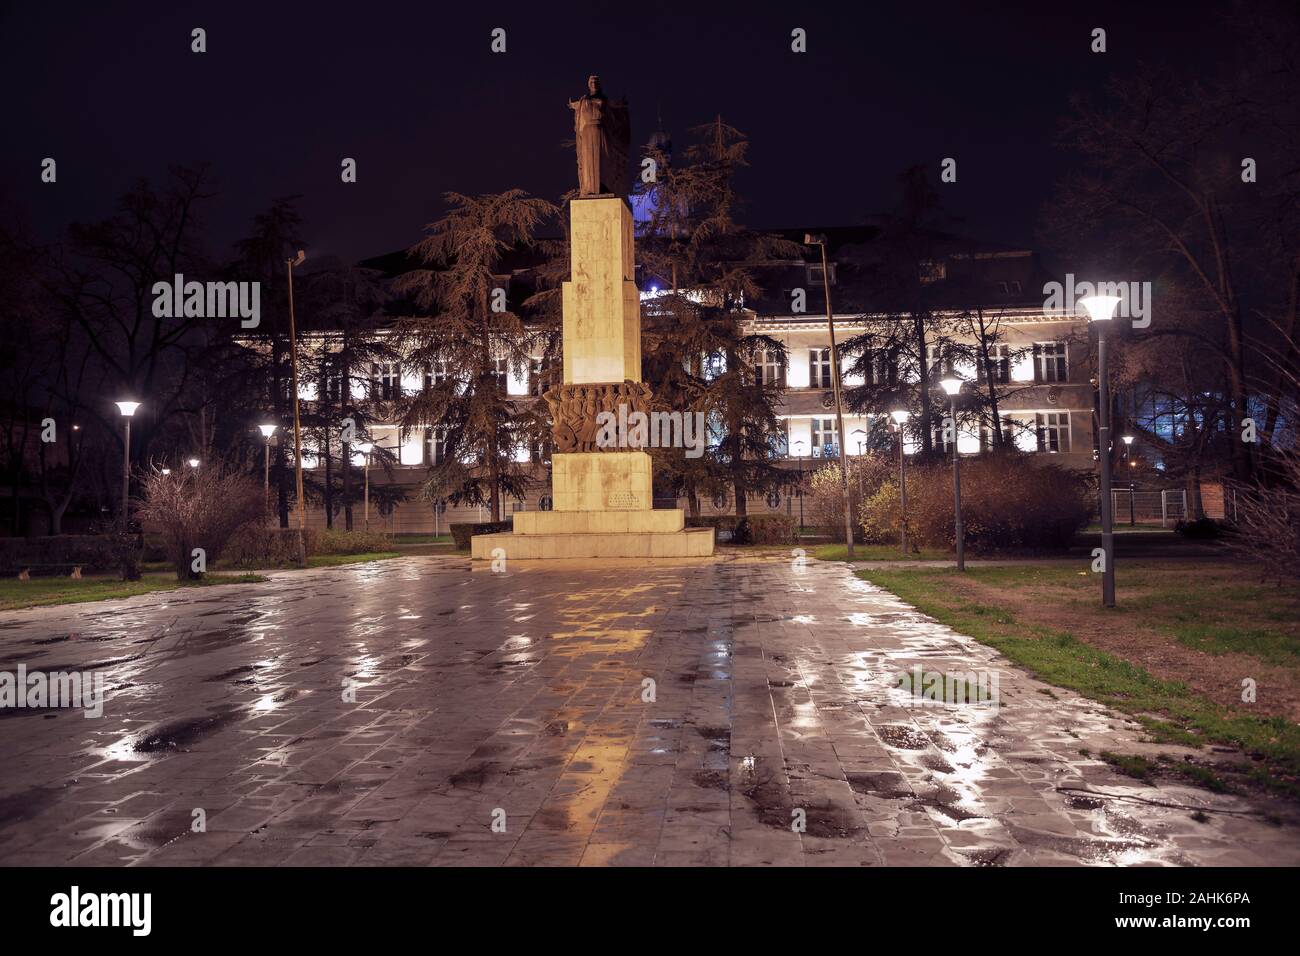 Belgrade, Serbia, Dec 29, 2019: Night view of the Monument honoring members of the Resistance who lost their lives during the WWII Stock Photo